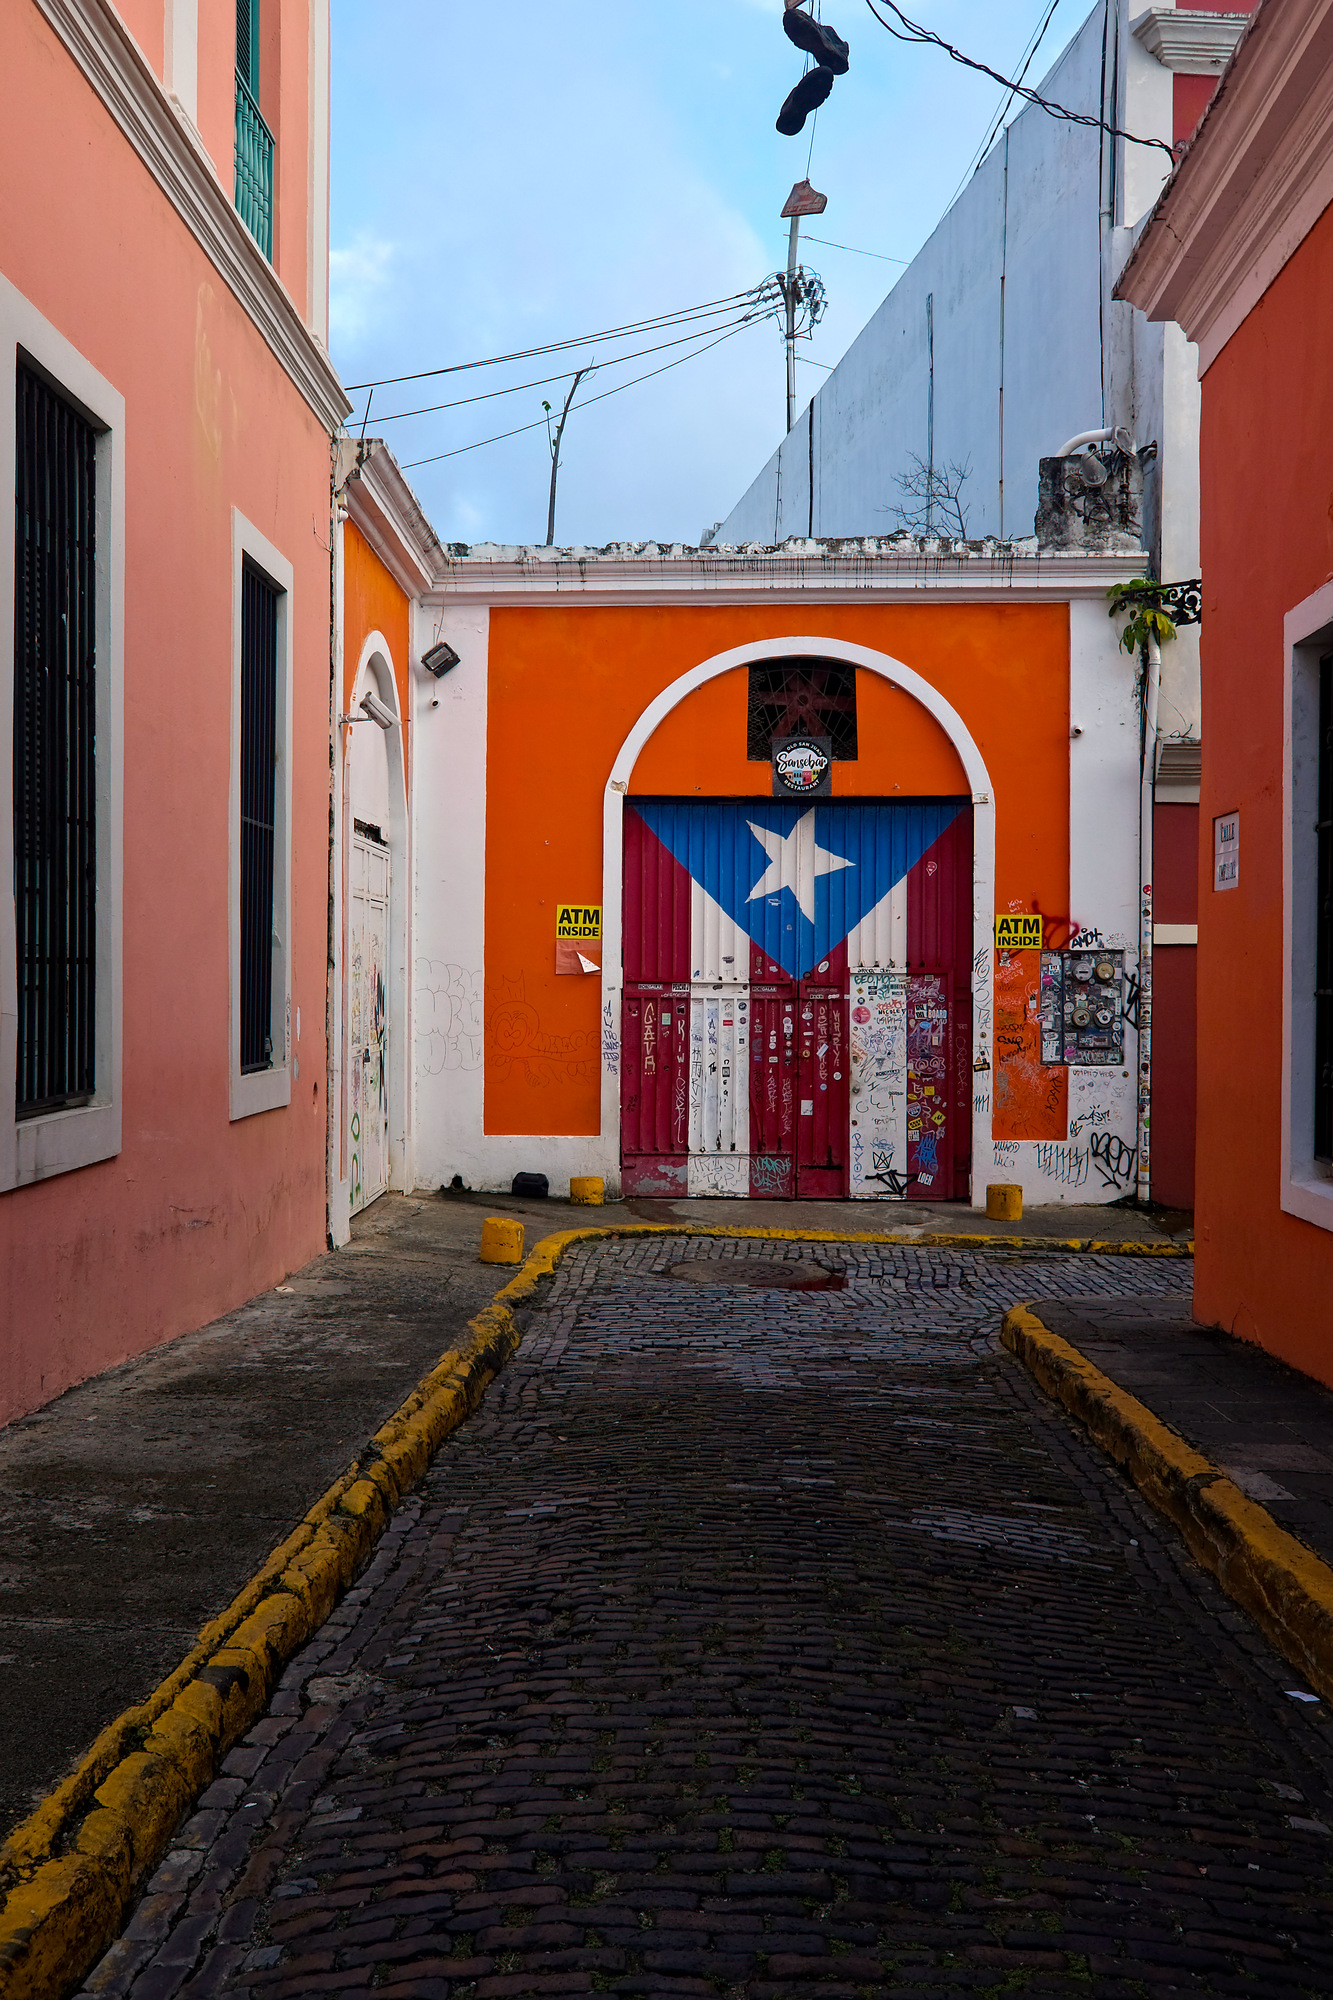 View of a mural of a Puerto Rican flag